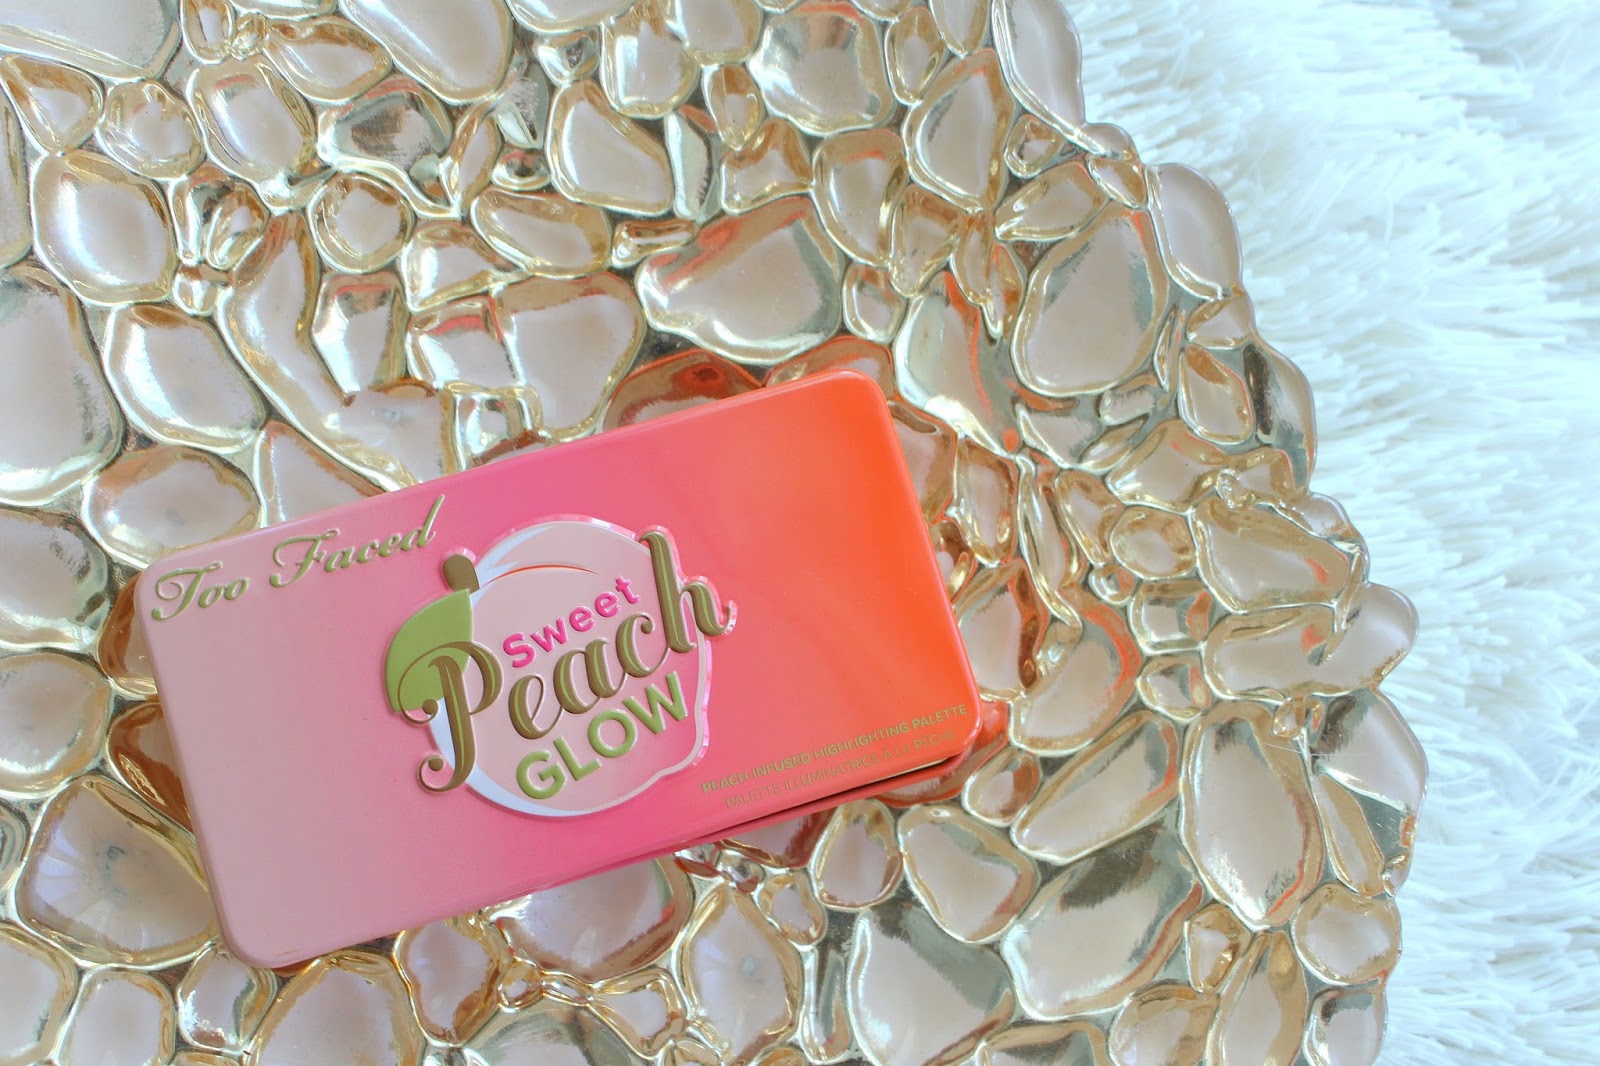 Brobrygge Souvenir søsyge Samantha Jane: Too Faced Sweet Peach Collection Swatches and Review